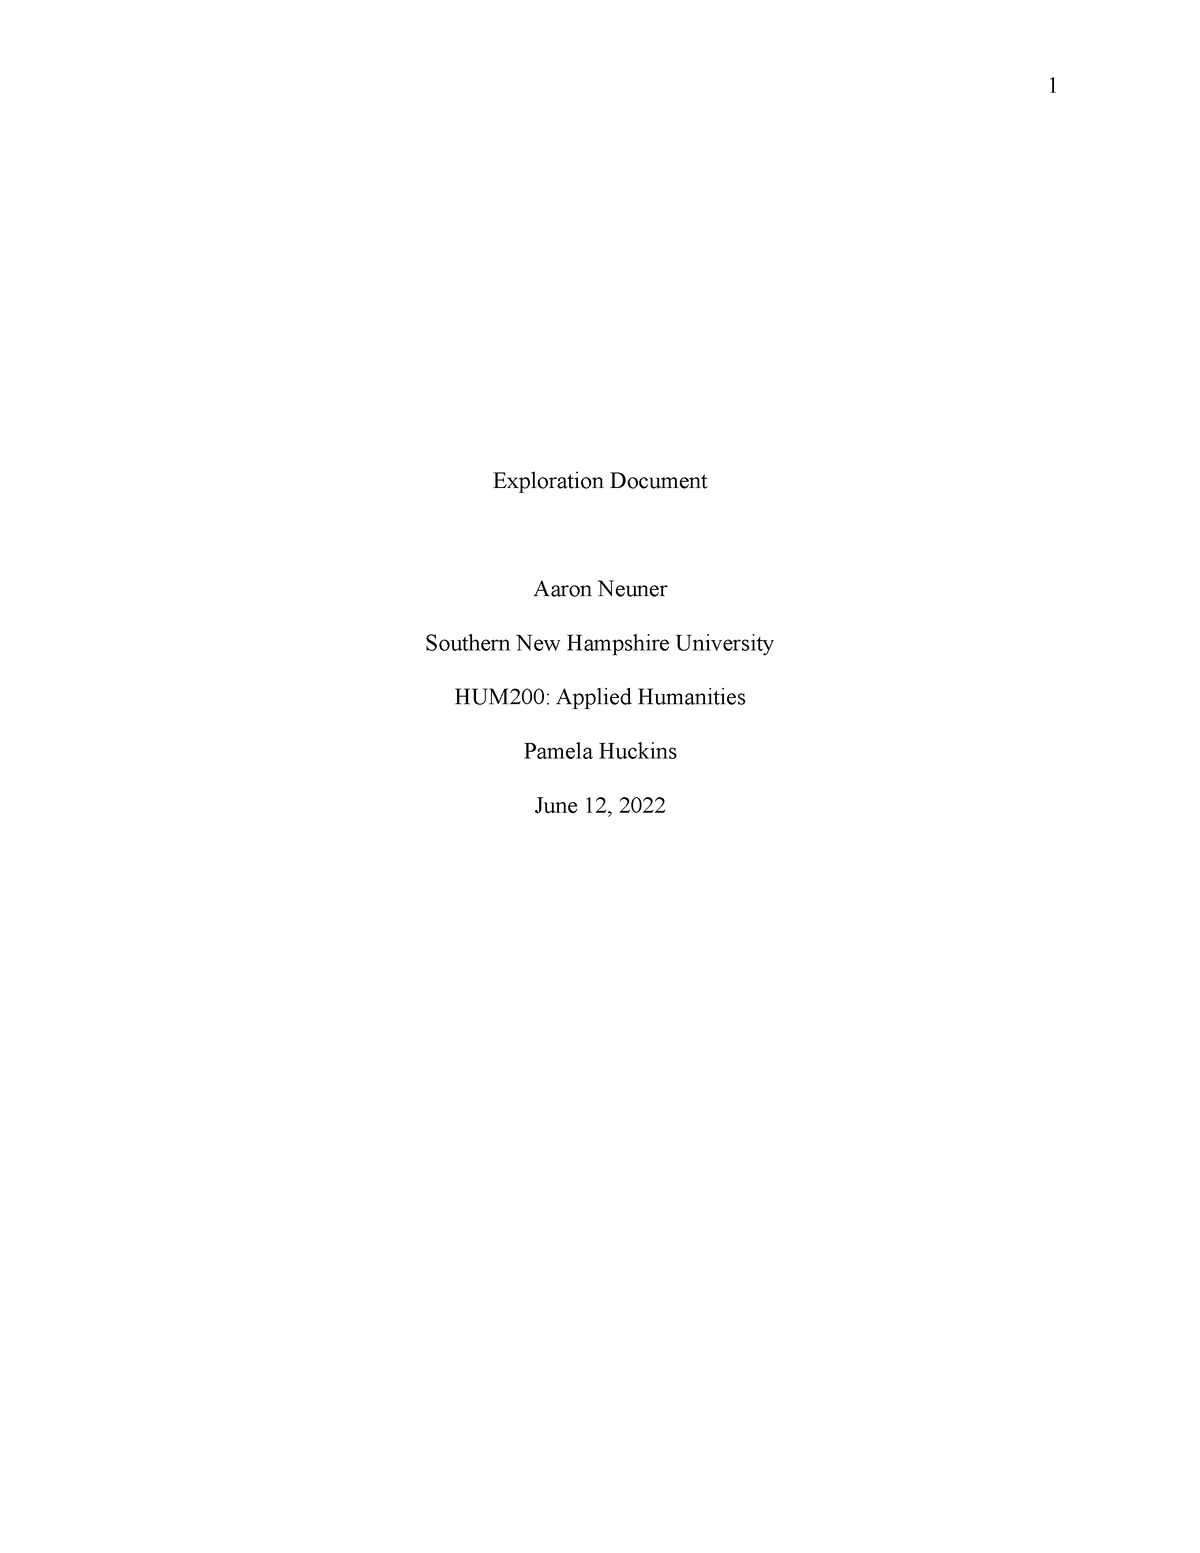 Course Project Part One - Exploration Document Aaron Neuner Southern ...